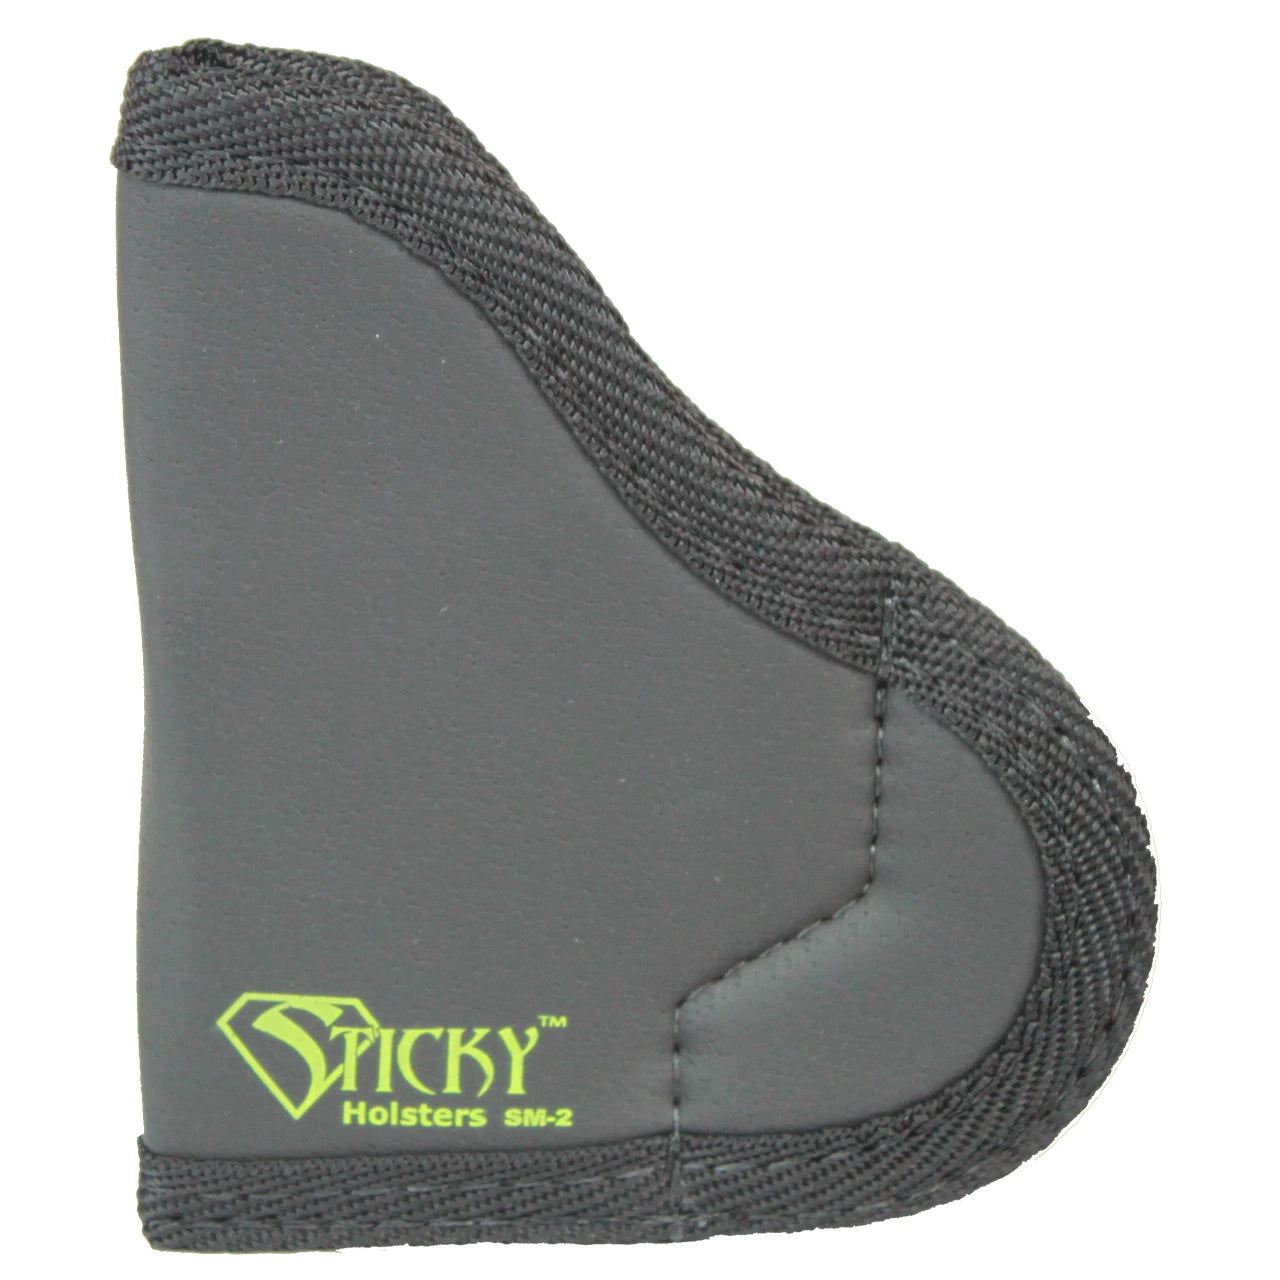 Sticky Holsters | SM-2 Small Pistol Holster for Pocket 380's